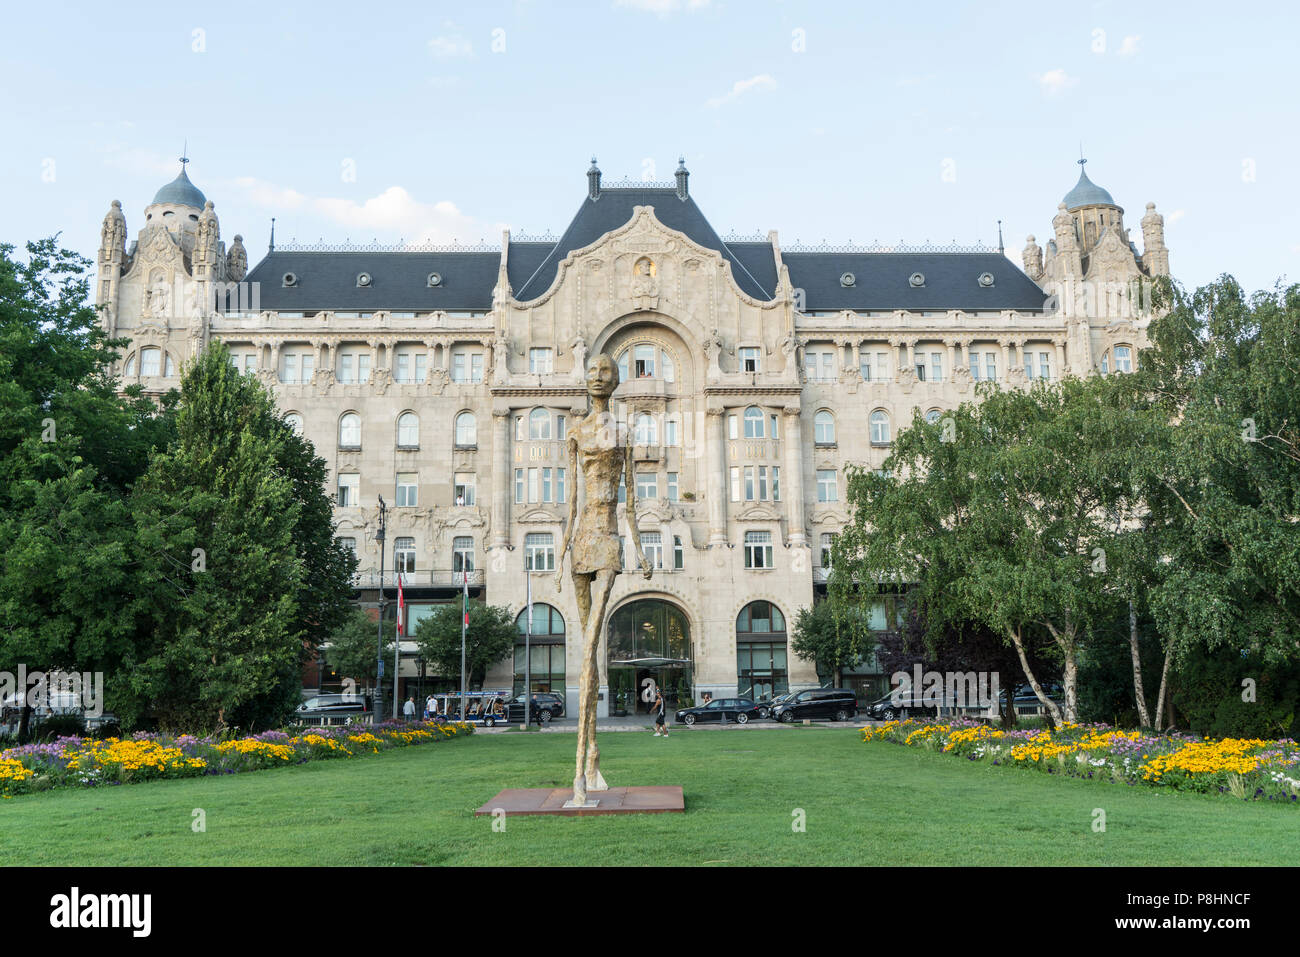 view of the facade of the Gresham Palace in Budapest, Hungary Stock Photo